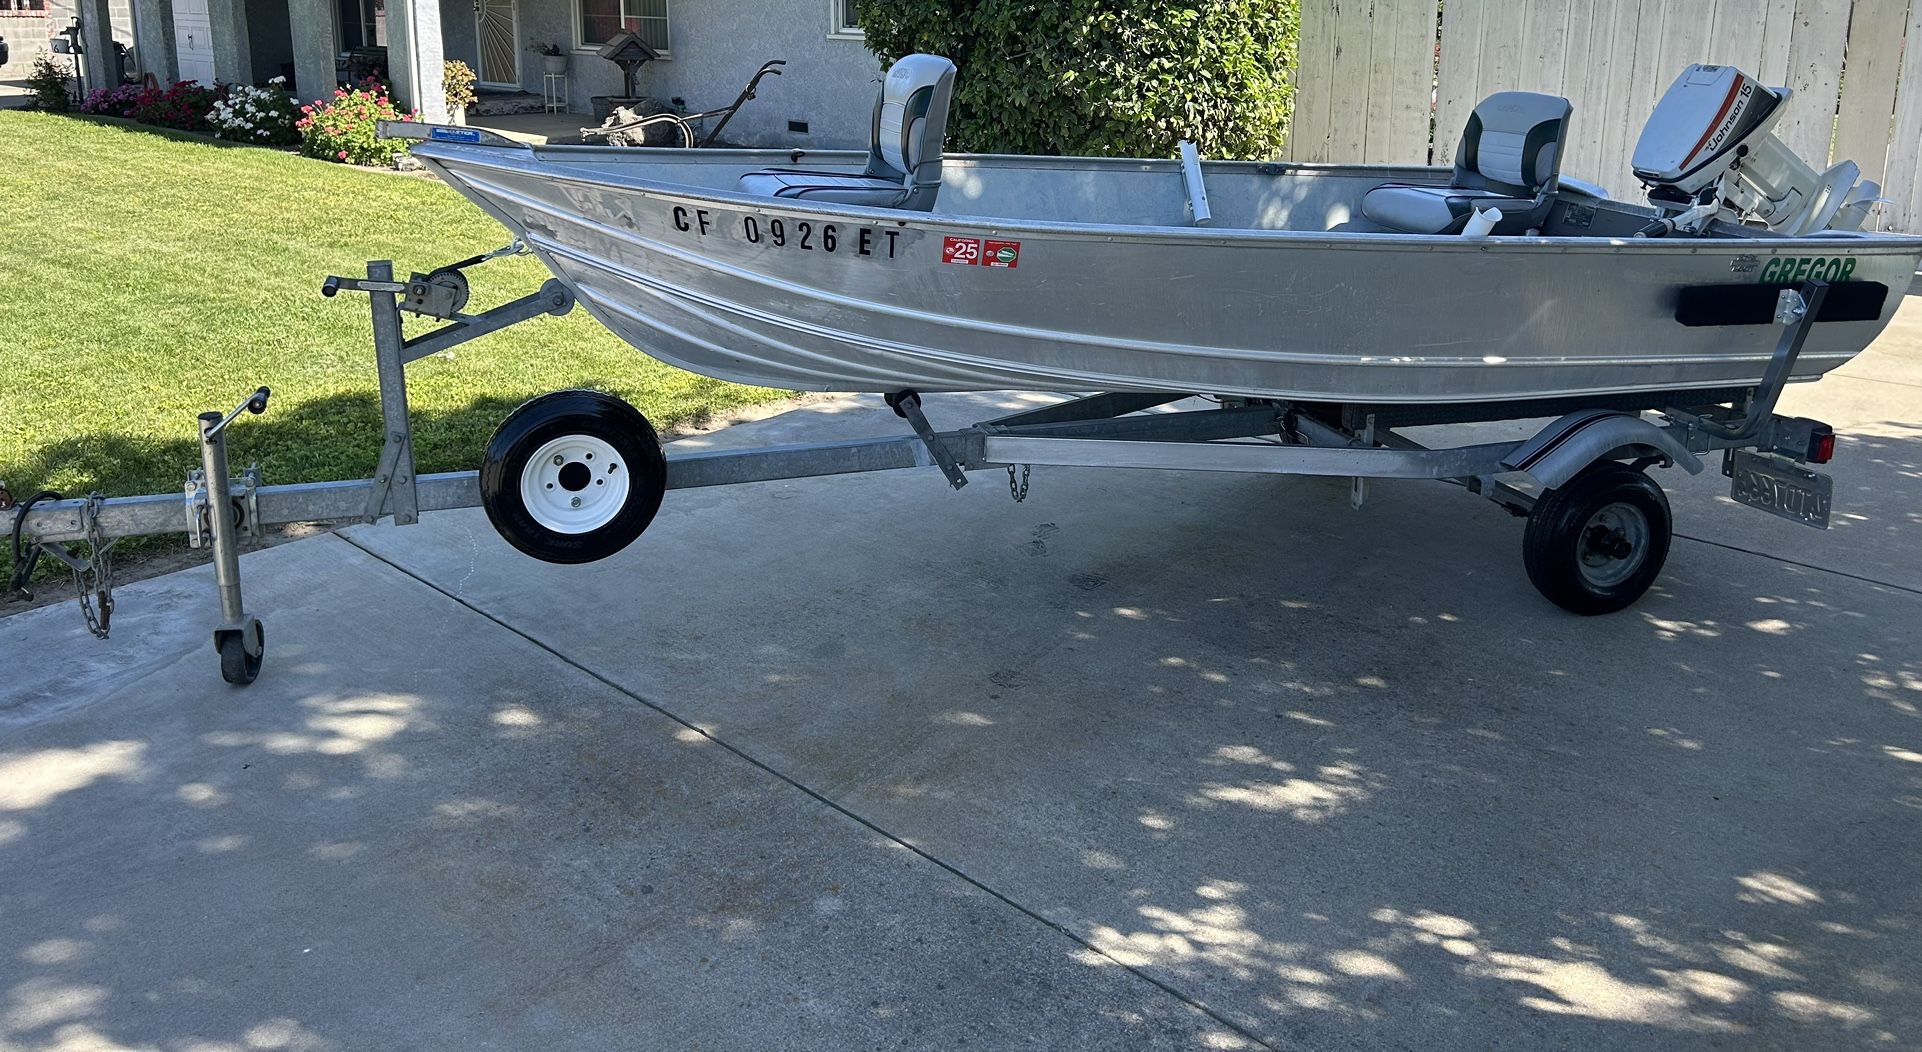 12’3” Gregor Aluminum Fishing Boat and Trailer with A Johnson 15 Horsepower Two Stroke Motor